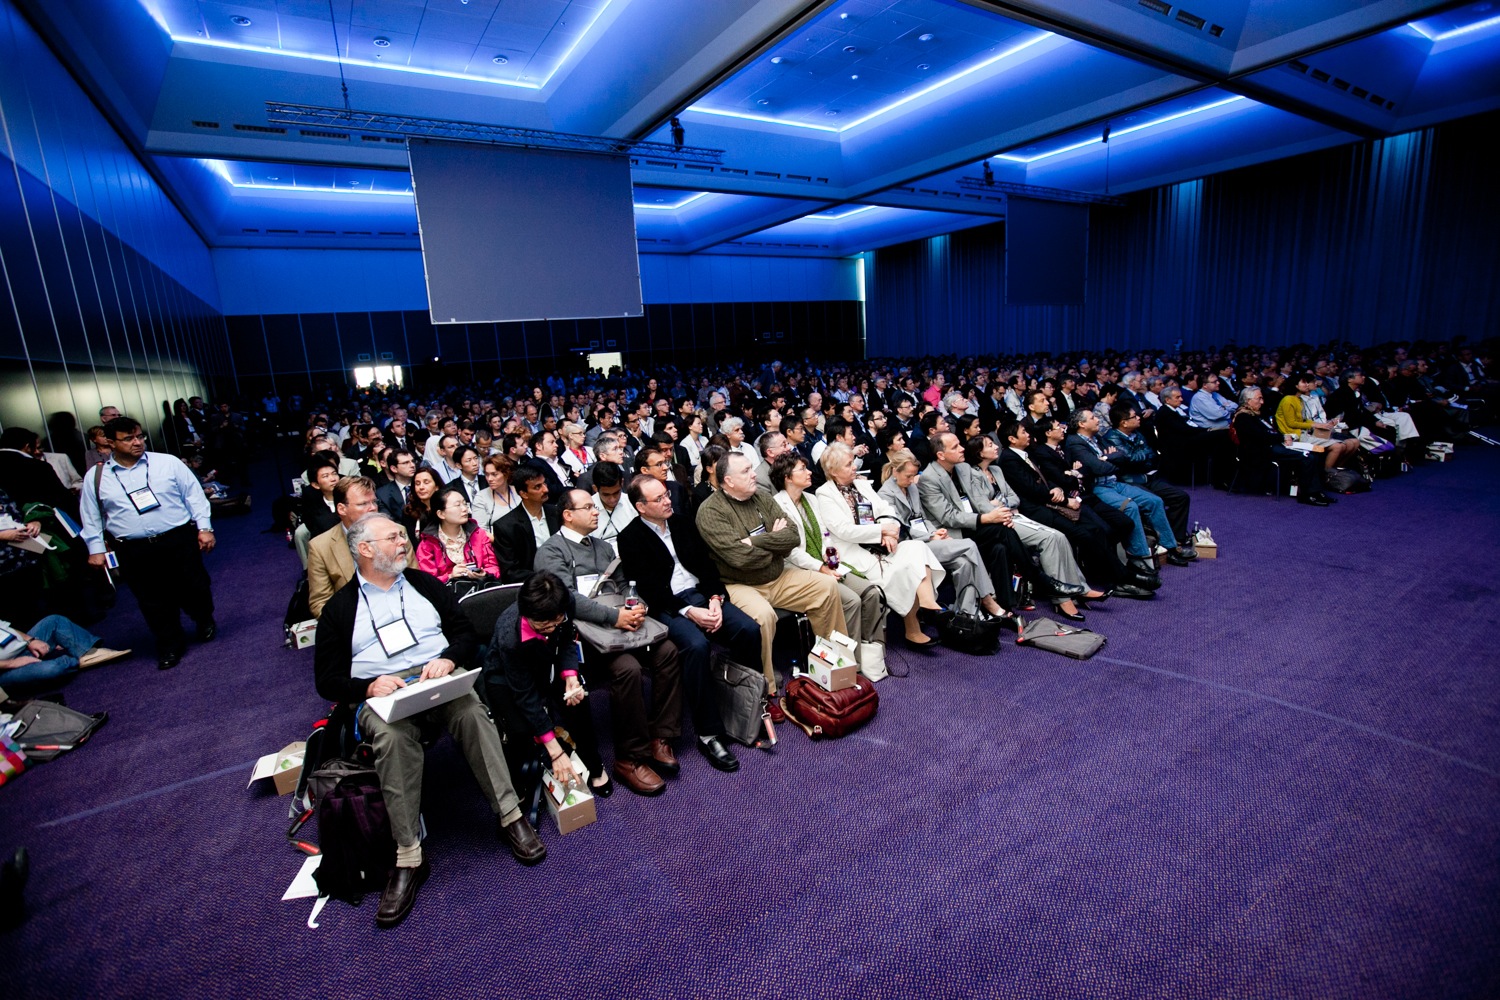 14th World Conference on Lung Cancer (July 3-7, 2011), Amsterdam, The Netherlands